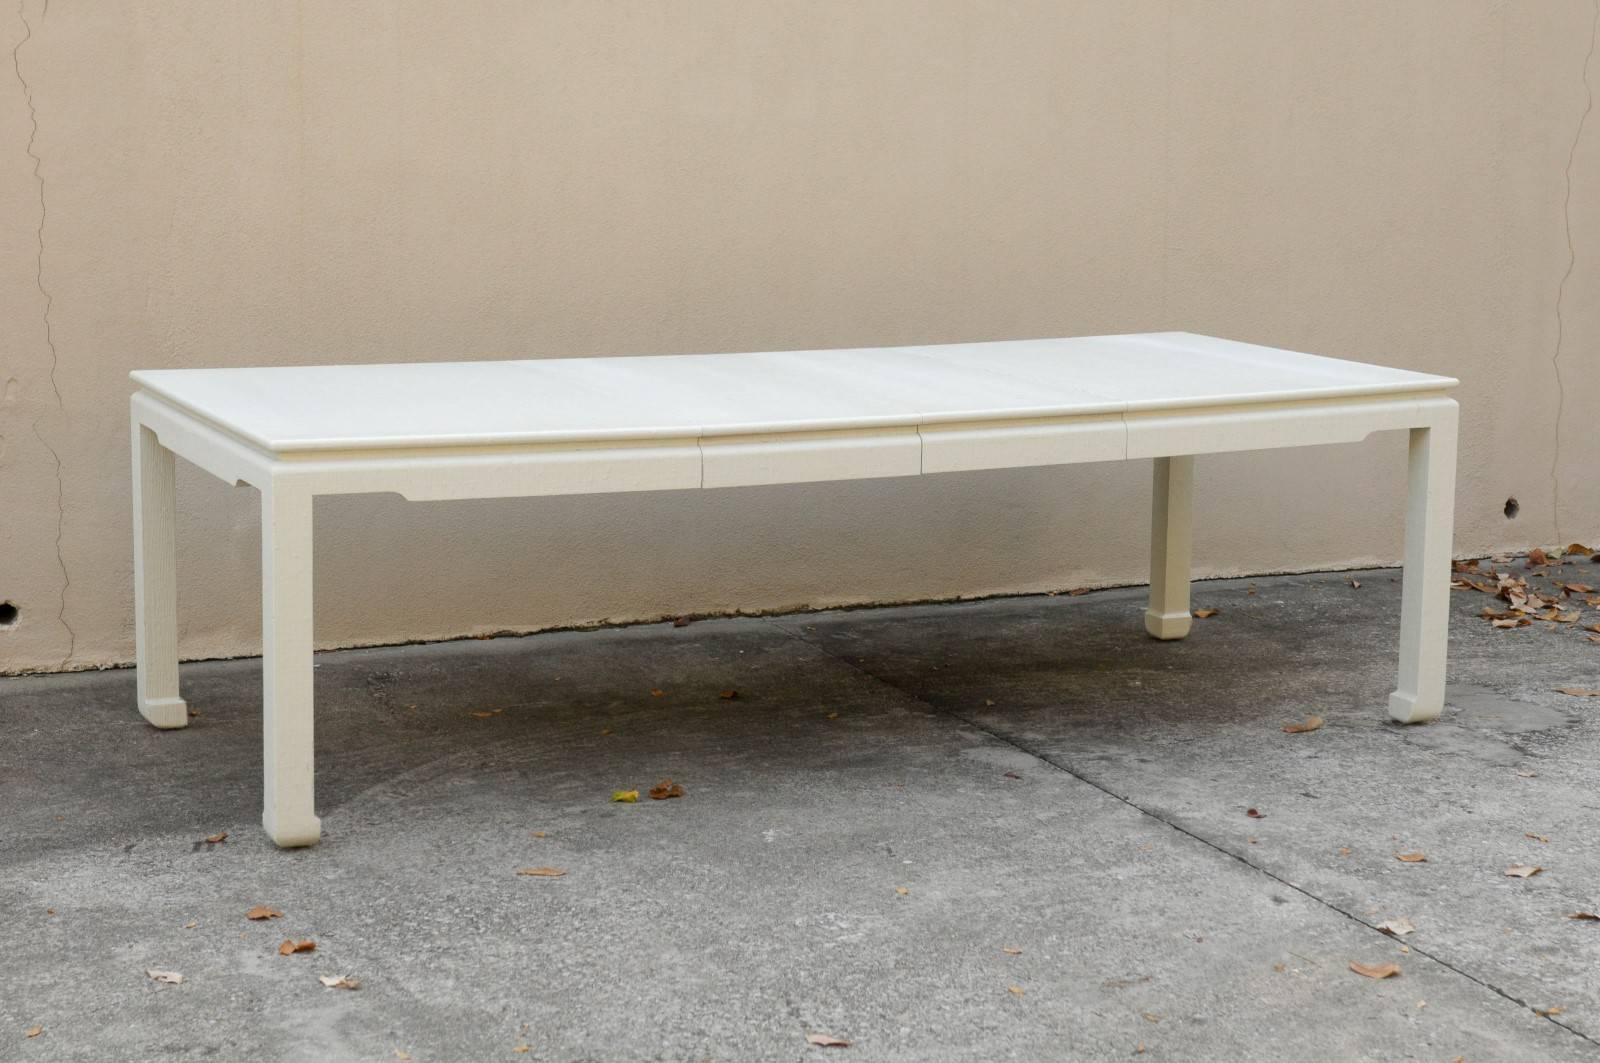 A stellar vintage dining table, circa 1970s. Handsome Parsons style form with subtle Asian detail at the apron and feet. Veneered in textured raffia and finished in cream lacquer. May also serve as a fabulous writing desk in its reduced form. The